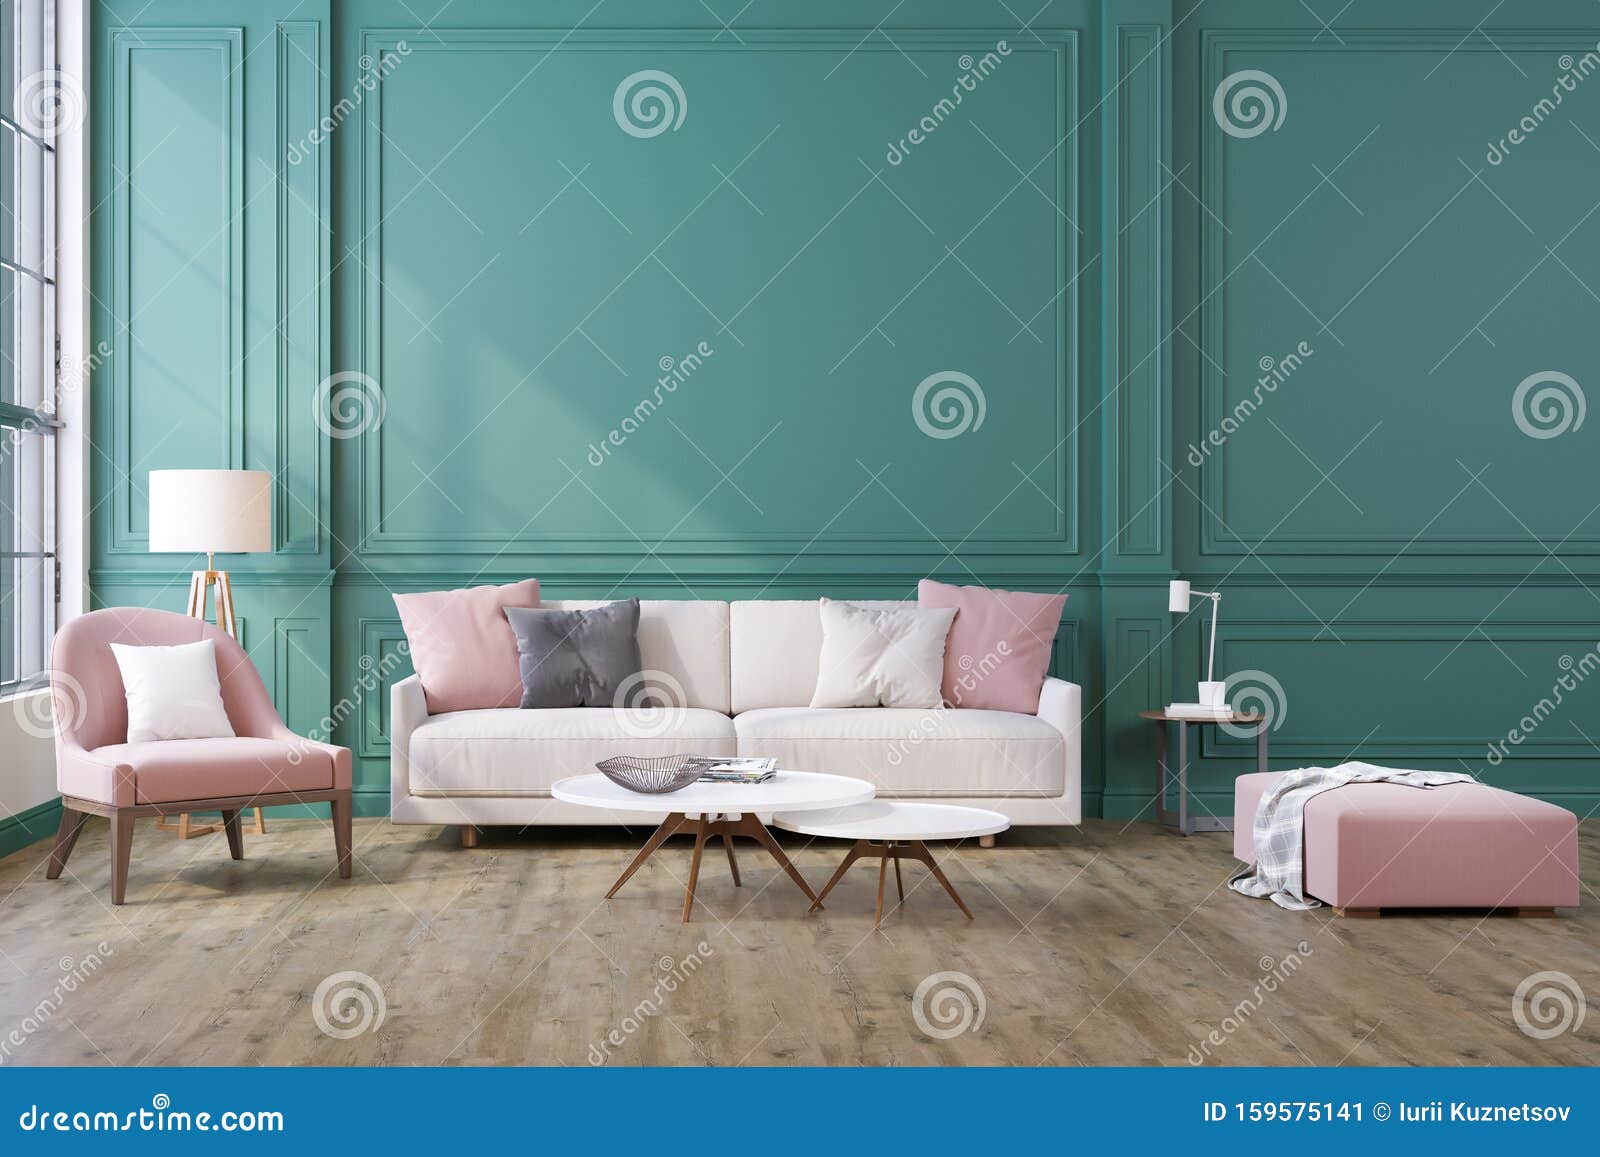 Decorative Background for Home, Office and Hotel. Modern Interior Design  Stock Image - Image of light, decor: 159575141